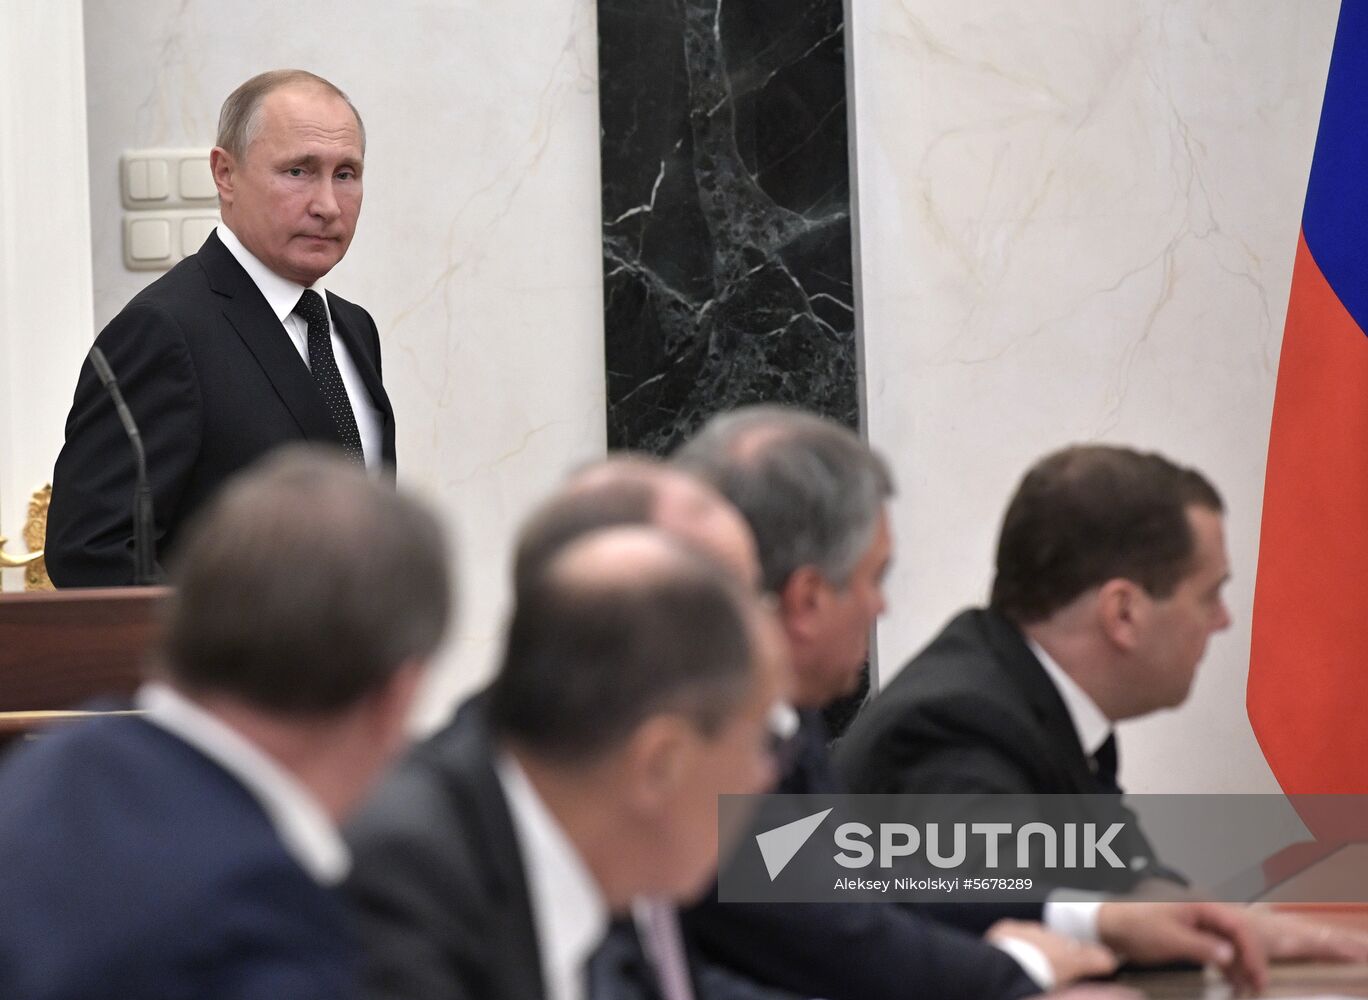 President Putin chairs Russia’s Security Council meeting